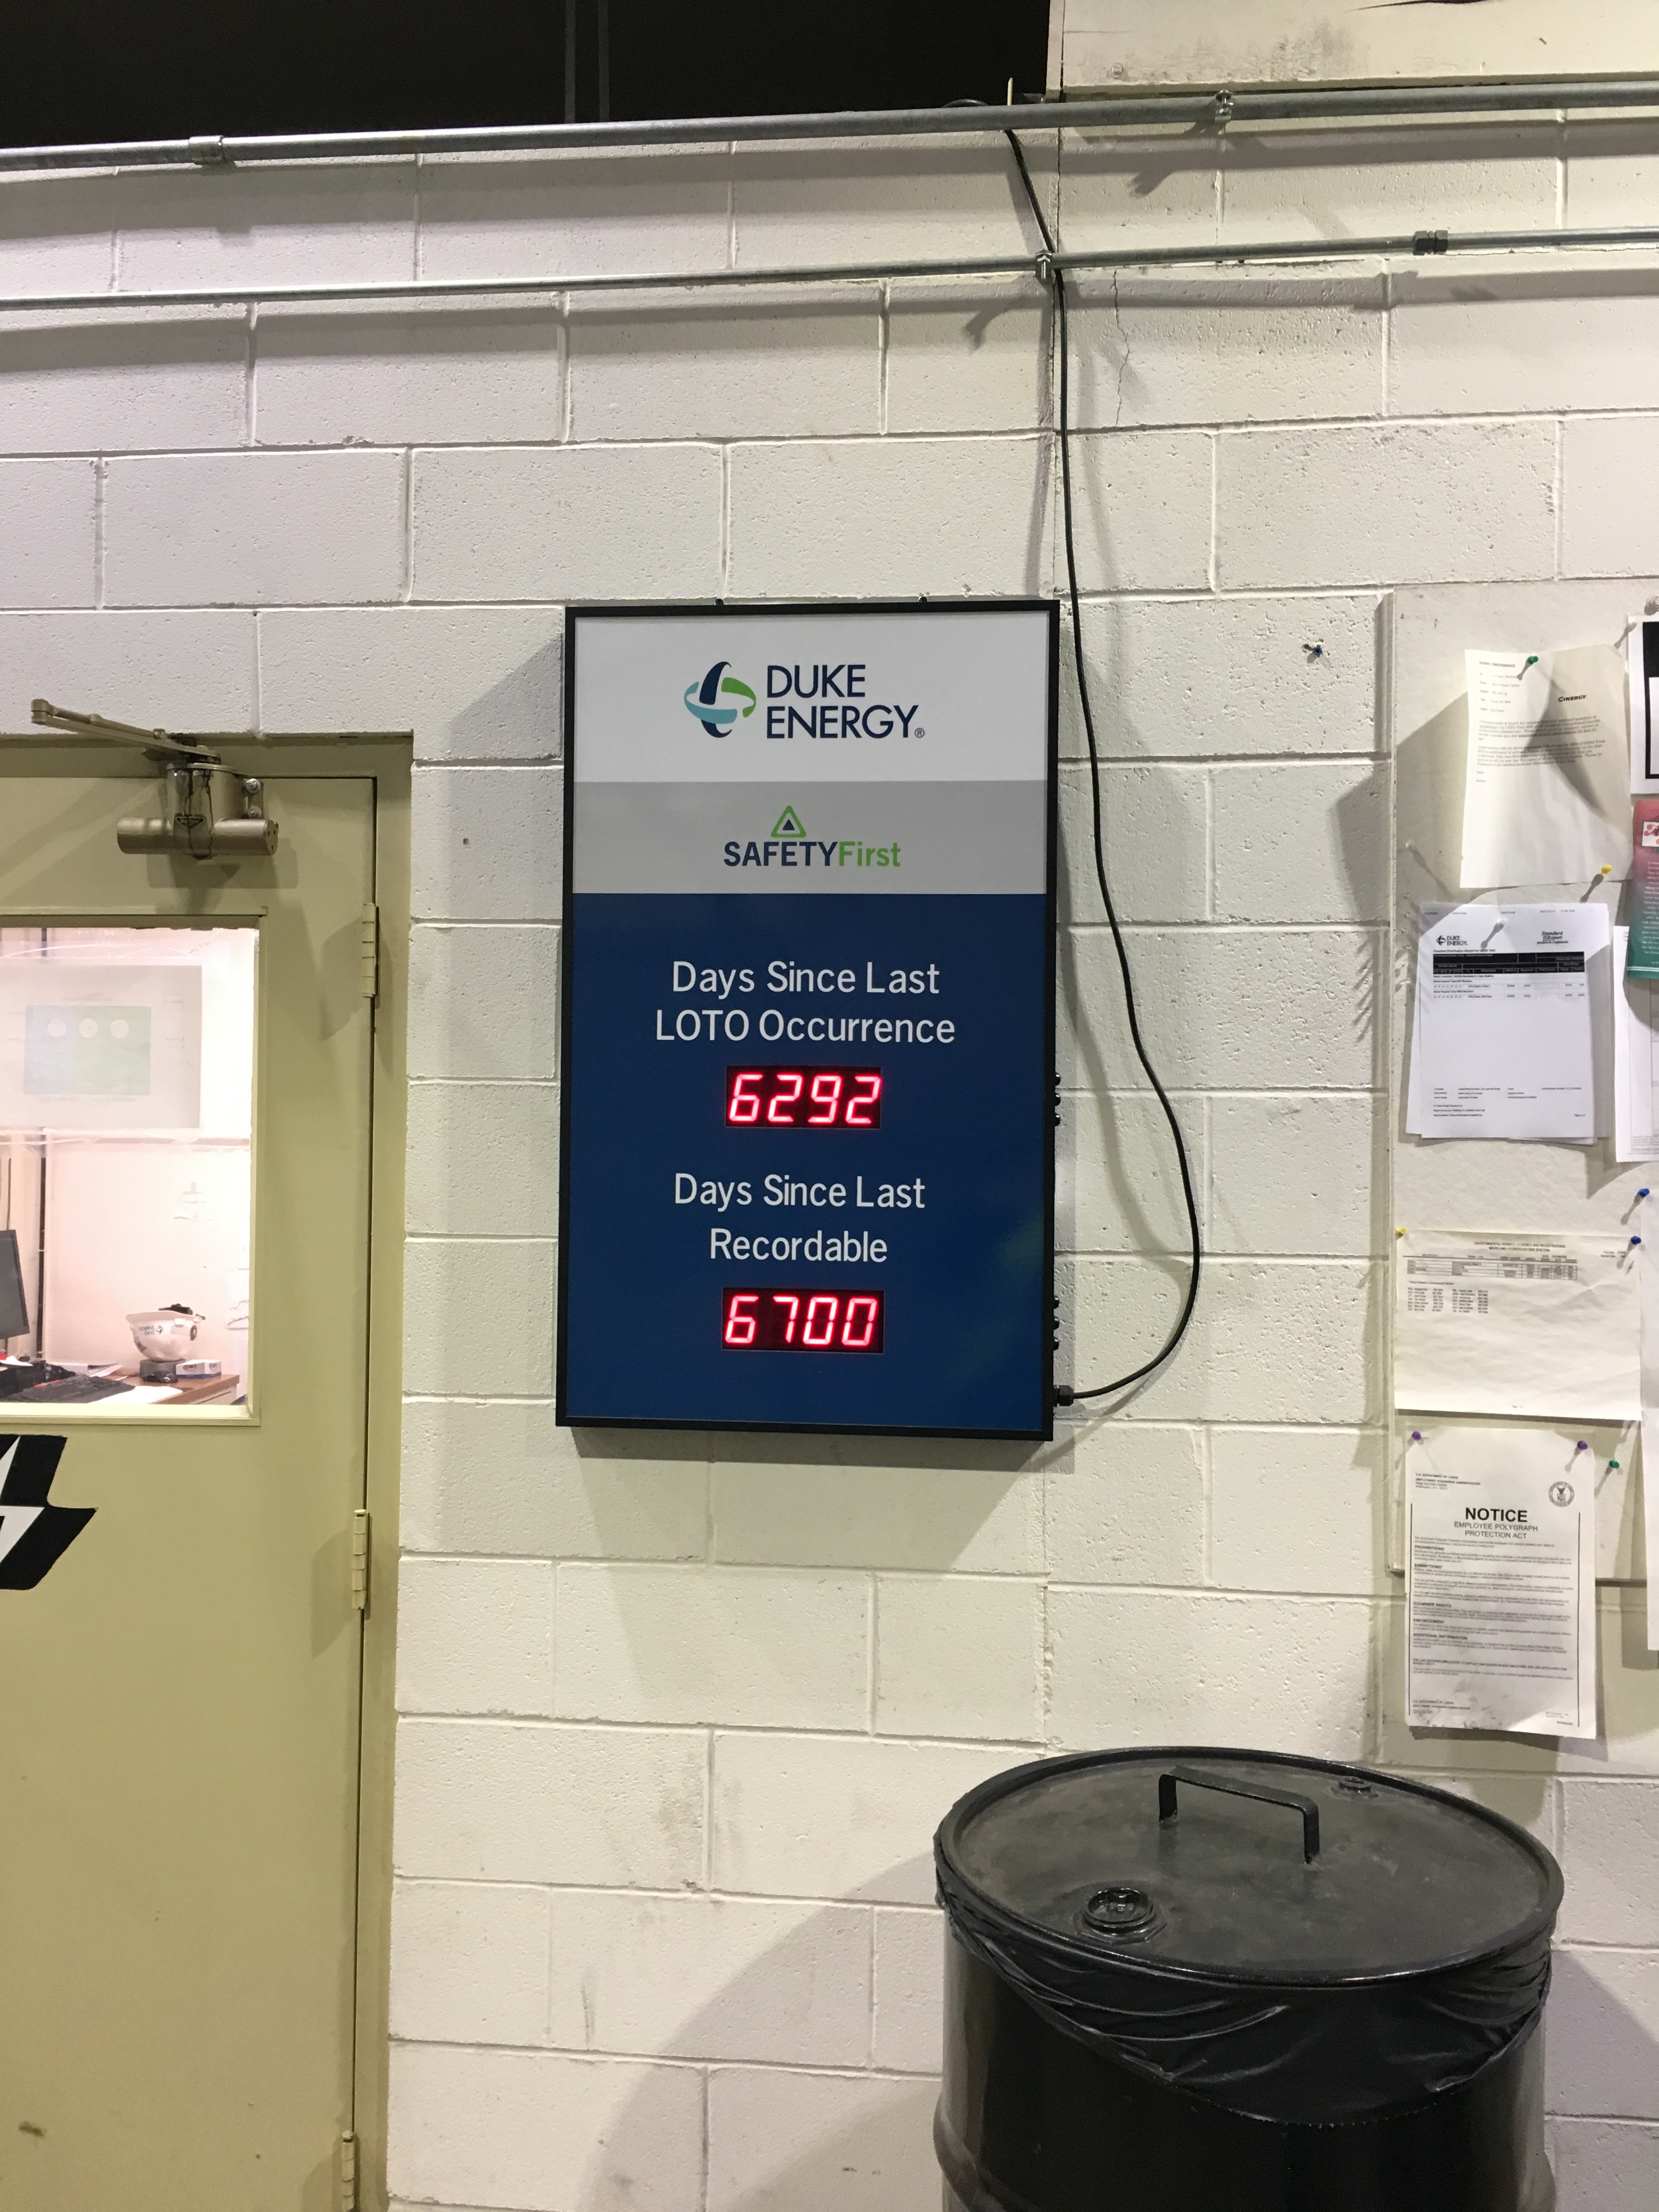 Days without Lock out tag out and since last recordable safety scoreboard